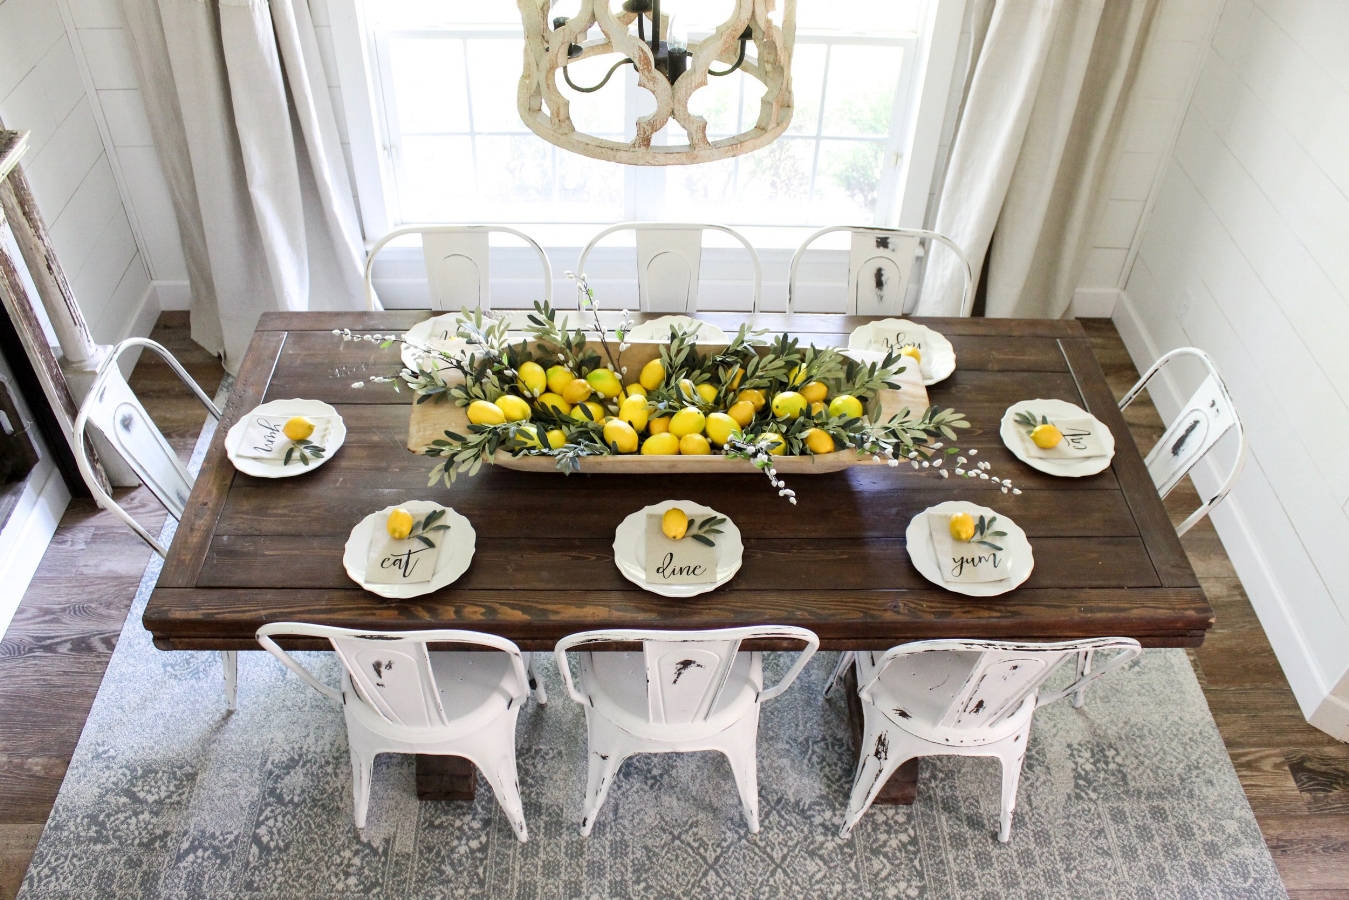 Dining Room Table Centerpieces With Lemons